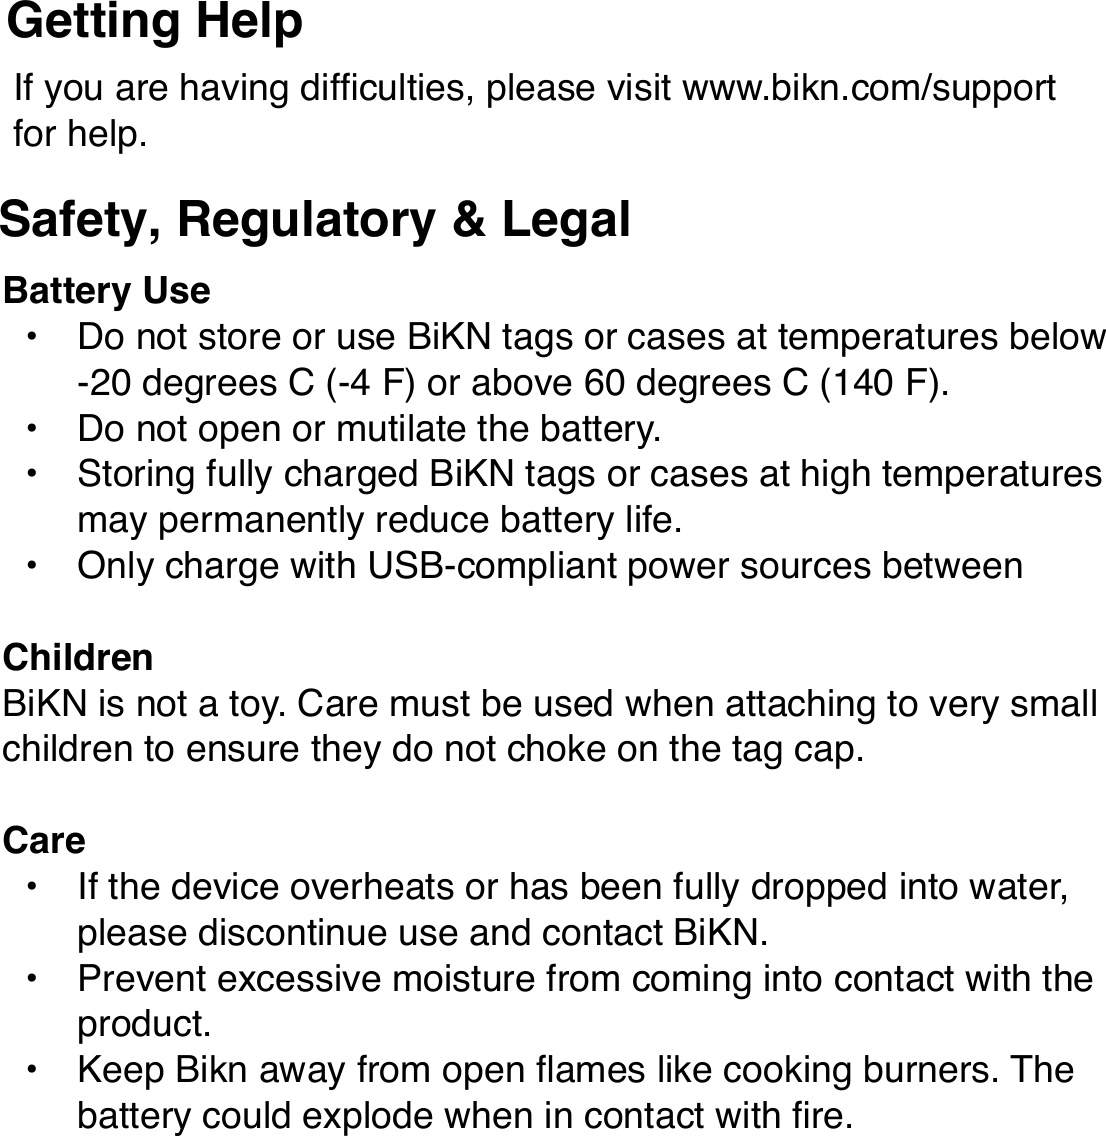 If you are having difﬁculties, please visit www.bikn.com/support for help.Getting HelpSafety, Regulatory &amp; LegalBattery Use• Do not store or use BiKN tags or cases at temperatures below -20 degrees C (-4 F) or above 60 degrees C (140 F).• Do not open or mutilate the battery.• Storing fully charged BiKN tags or cases at high temperatures may permanently reduce battery life.• Only charge with USB-compliant power sources between ChildrenBiKN is not a toy. Care must be used when attaching to very small children to ensure they do not choke on the tag cap.Care• If the device overheats or has been fully dropped into water, please discontinue use and contact BiKN.• Prevent excessive moisture from coming into contact with the product.• Keep Bikn away from open ﬂames like cooking burners. The battery could explode when in contact with ﬁre.Device Disposal and Recycling.Please do not dispose of BiKN devices in a ﬁre or with your household waste. These items should be disposed of in accordance to your local recycling rules, so please contact your local recycling center for information on proper disposal. Or you may return unwanted devices to BiKN using the procedures found at www.bikn.com/support.Software Copyright NoticeThis product includes software copyrighted by InMotion Software. This software may not be modiﬁed, reverse-engineered, distributed, or reproduced in any manner to the extent allowed by law.FCC Notice to UsersThese devices comply with part 15 of theFCC Rules.Operation is subject to the following two conditions: (1) This device may not cause harmful interference, and (2) this device must accept any interference received, including interference that may cause undesired operation. See 47 CFR Sec. 15.19(3). This equipment has been tested and found to comply with the limits for a Class B digital device, pursuant to part 15 of the FCC Rules. These limits are designed to provide reasonable protection against harmful interference in a residential installation. This equipment generates, uses and can radiate radio frequency energy and, if not installed and used in accordance with the instructions, may cause harmful interference to radio communications. However, there is no guarantee that interference will not occur in a particular installation. If this equipment does cause harmful interference to radio or television reception, which can be determined by turning theequipment off and on, the user is encouraged to try to correct the interference by one or more of the following measures: • Reorient or relocate the receiving antenna.• Increase the separation between the equipment and the receiver.• Connect the equipment to an outlet on a circuit different from that to which the receiver is connected.• Consult the dealer or an experienced radio/TV technician for help.This device and its antenna must not be collocated or operated in conjunction with any other antenna or transmitter other than the Apple iPhone. To comply with FCC RF exposure requirements, only use supplied antenna. Any unauthorized modiﬁcation to the antenna or device could void the userʼs authority to operate this device.BiKN has not approved any changes or modiﬁcations to this device by the user. Any changes or modiﬁcations could void the userʼs authority to operate the equipment. See 47 CFR Sec. 15.21.Warranty.BiKN will warranty the product for the period of 1 year from the time of purchase in the United States from defects in materials and workmanship with the following exclusions:• Normal Wear and Tear. Periodic maintenance, repair and replacement due to normal wear and tear are excluded from coverage.• Abuse and Misuse. Defects or damage that result from improper operation, storage, misuse, physical damage such as cracks and scratches, contact with liquids, extreme humidity, sand dirt, extreme heat or food.• Unauthorized Service, Modiﬁcation, or Alteration. Defects resulting from unauthorized adjustment, alteration, or modiﬁcation in any way by someone not authorized by BiKN are excluded from coverage. This includes products with evidence of tampering such as broken seals or mismatched serial numbers.This warranty extends to you only if you are the end user with the original purchase receipt.BiKN will at its option repair, replace or refund the purchase price of any product that does not conform to this warranty. We may use functionally equivalent reconditioned/refurbished/pre-owned or new units.To obtain warranty service , please visit www.bikn.com/support.